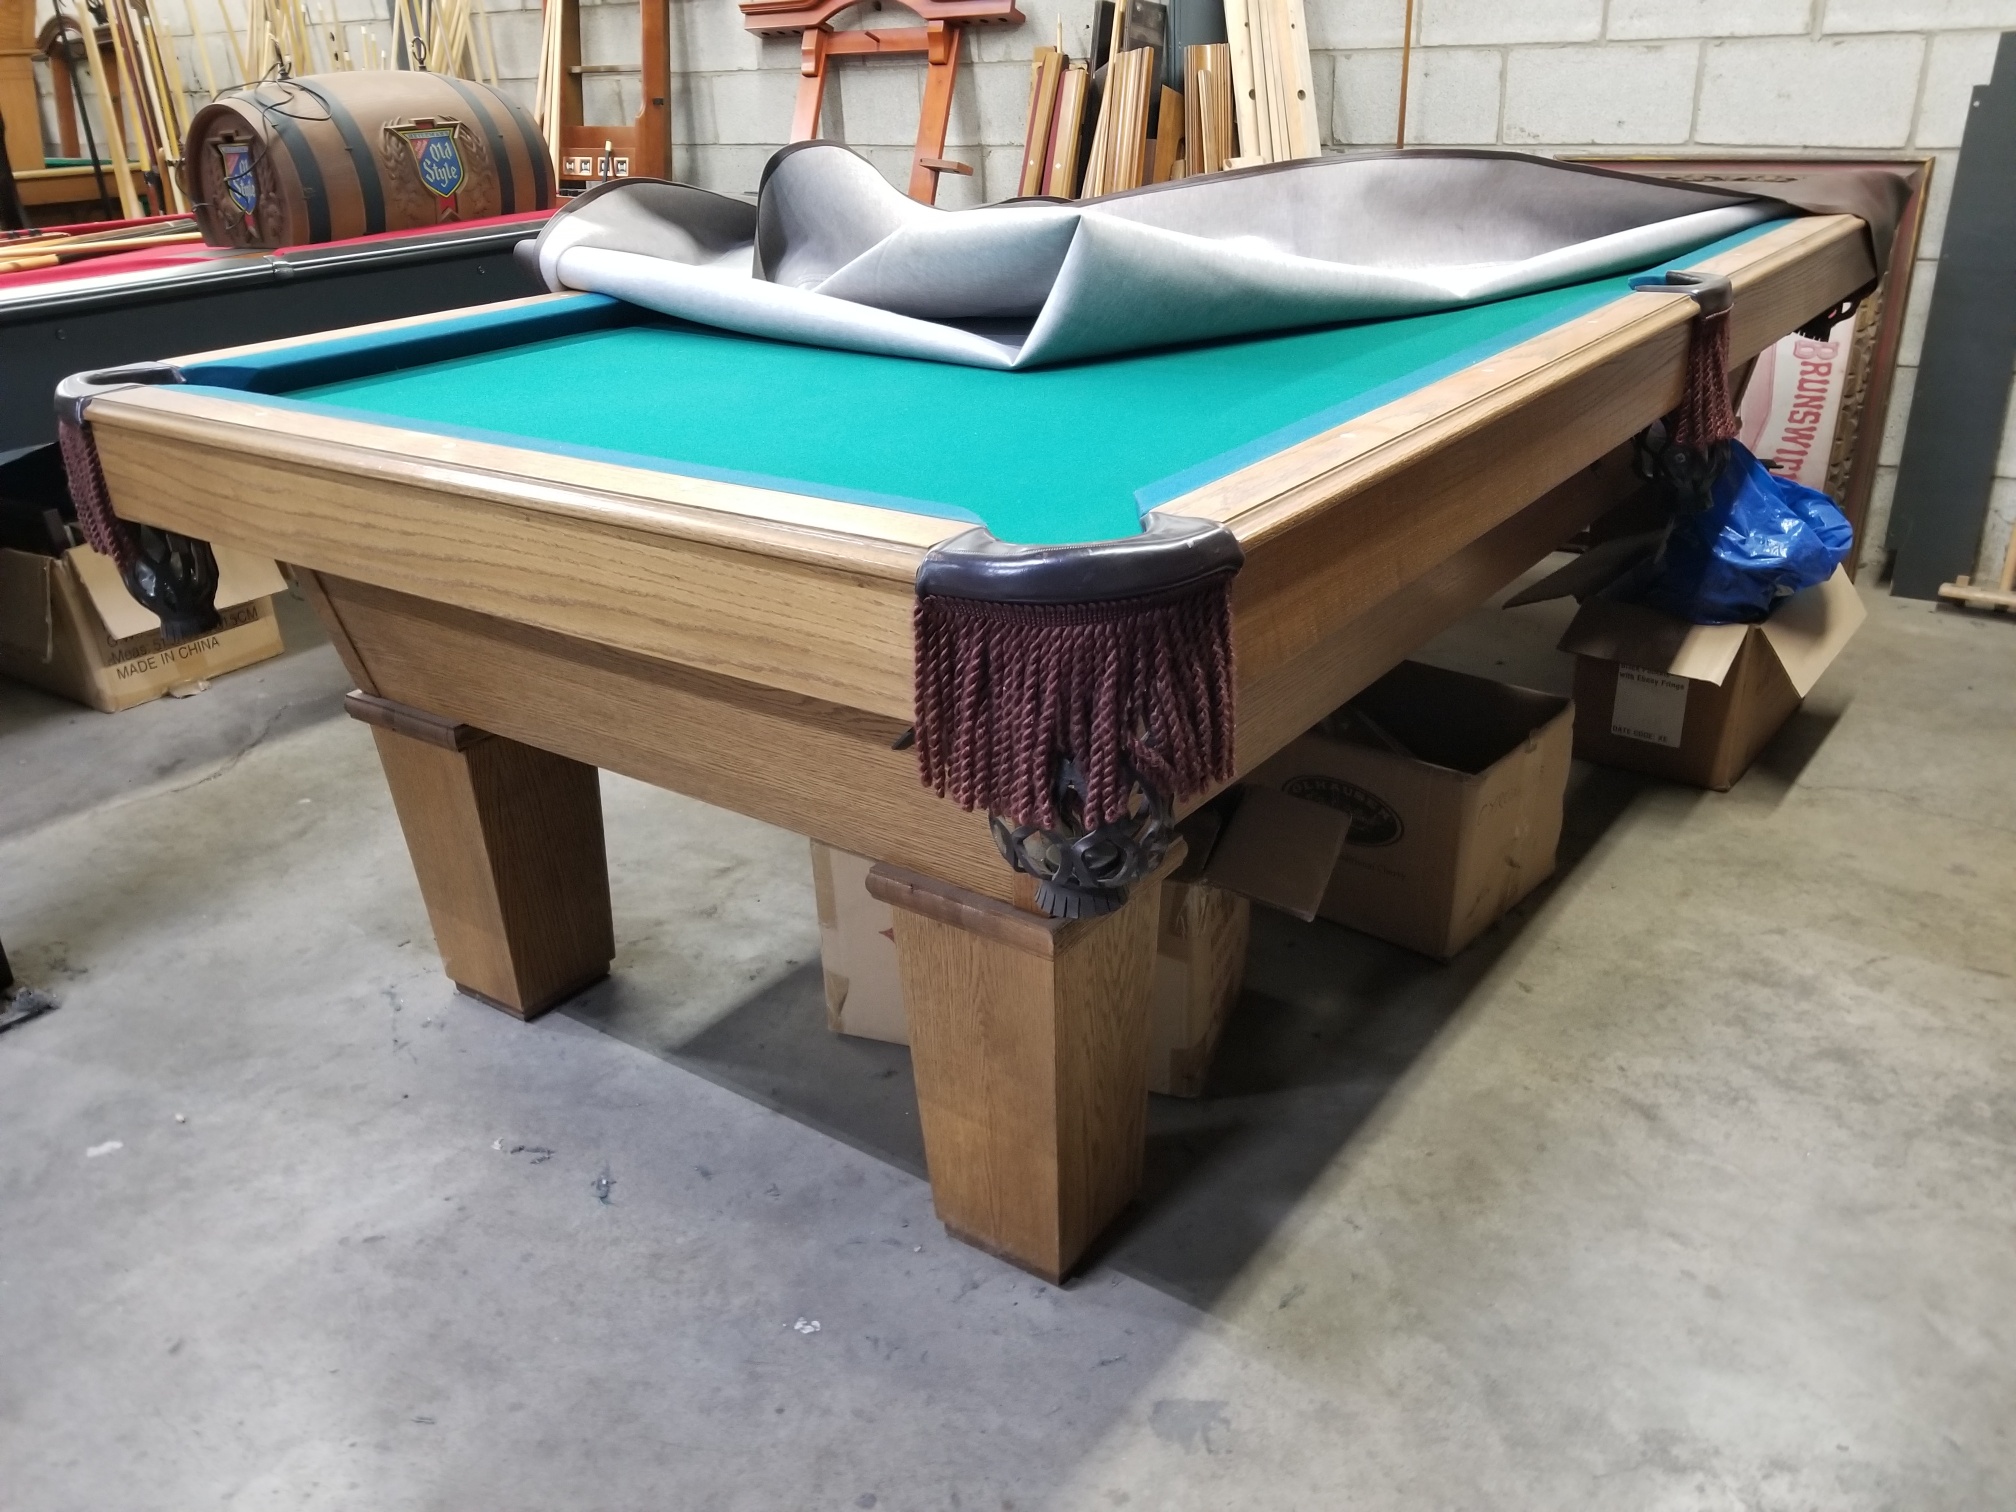 8 ft pool table with leather drop pockets